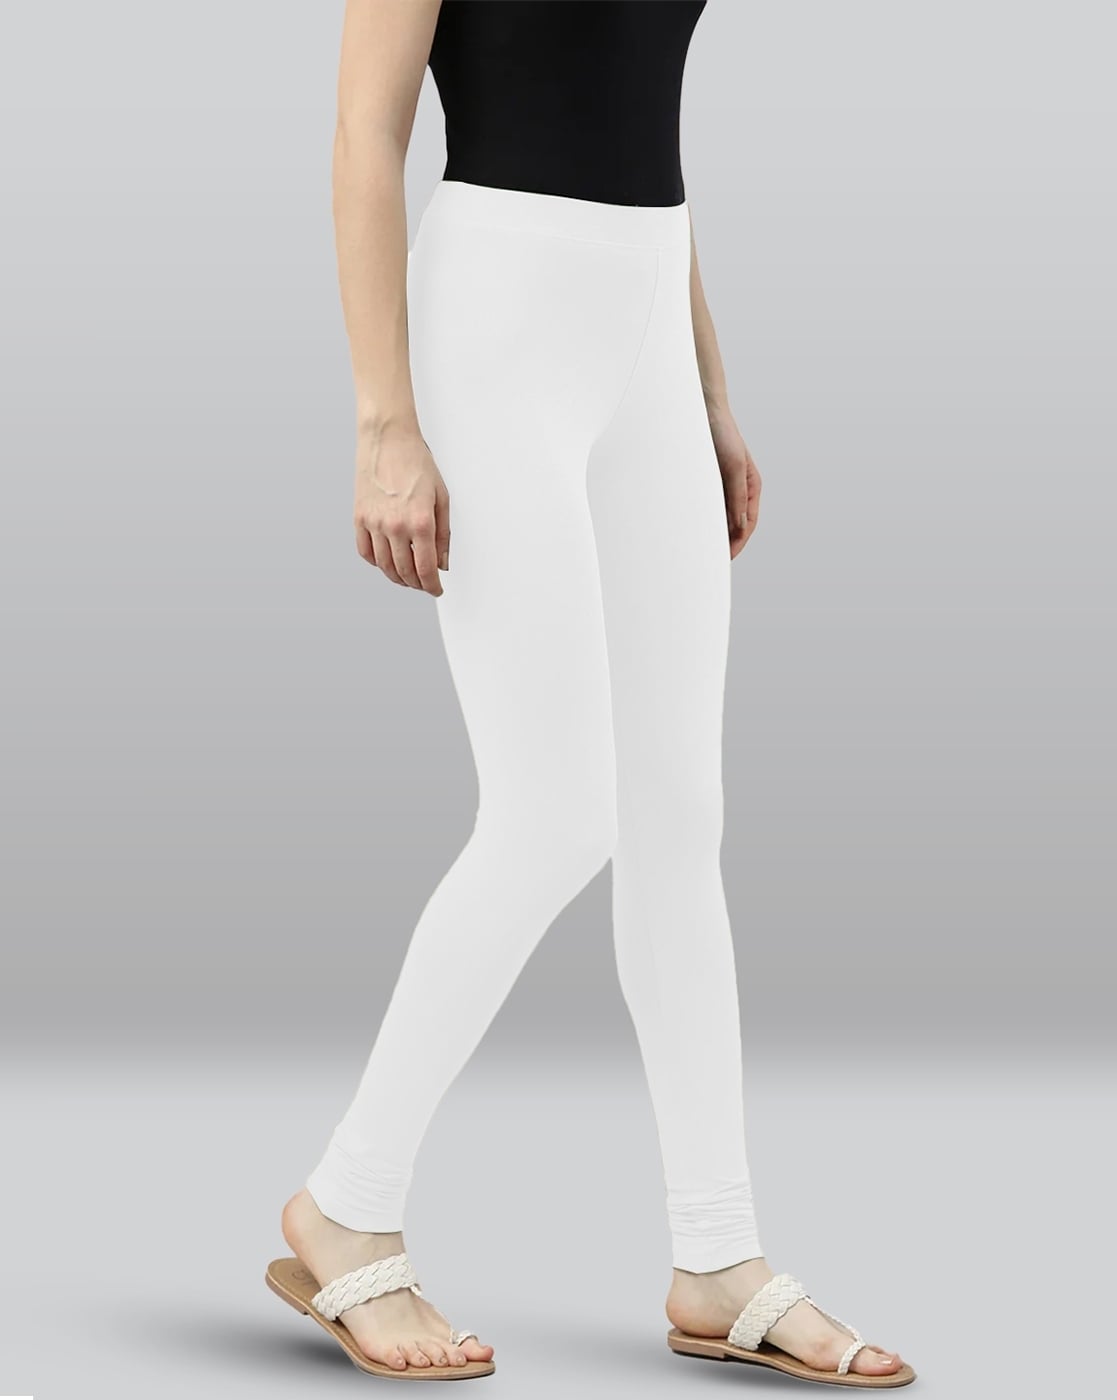 Buy Lux Lyra Ankle Length Legging L185 Champagne Gold Free Size Online at  Low Prices in India at Bigdeals24x7.com